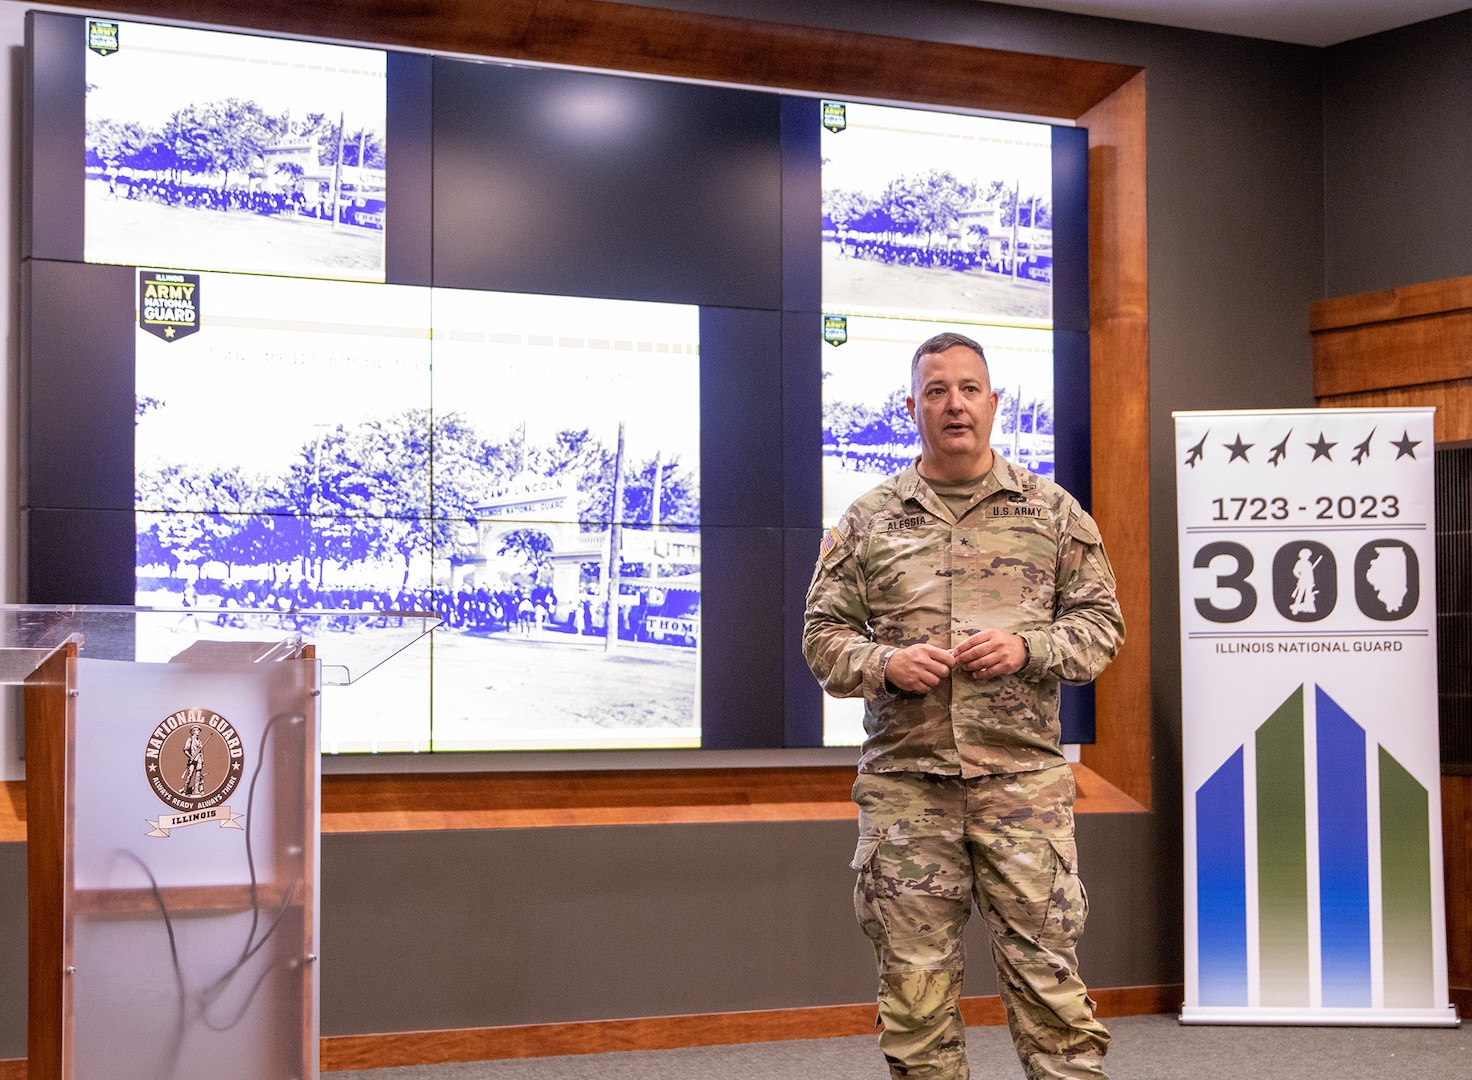 Brig. Gen. Mark Alessia, Director of the Illinois National Guard Joint Staff, welcomes local business leaders to Camp Lincoln, in Springfield, Illinois, for a brief overview of doing business with the government July 6 during the Camp Lincoln 117th anniversary commemoration.